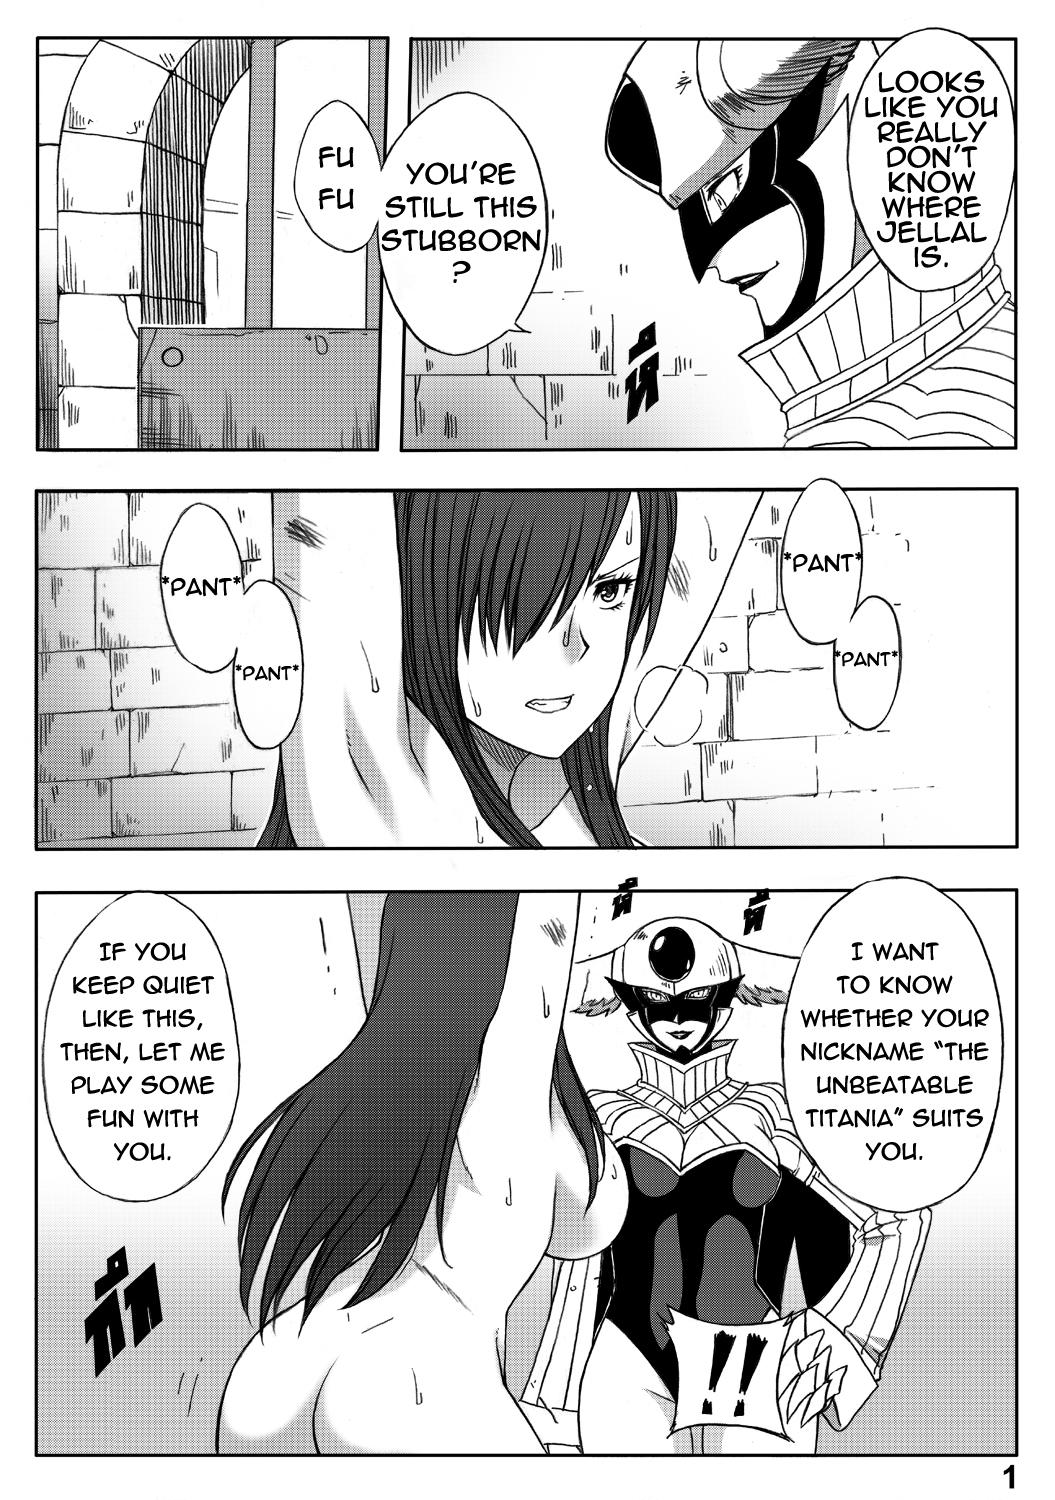 Porno Fairy Tail 365.5.1 The End of Titania - Fairy tail Oral Sex - Page 4